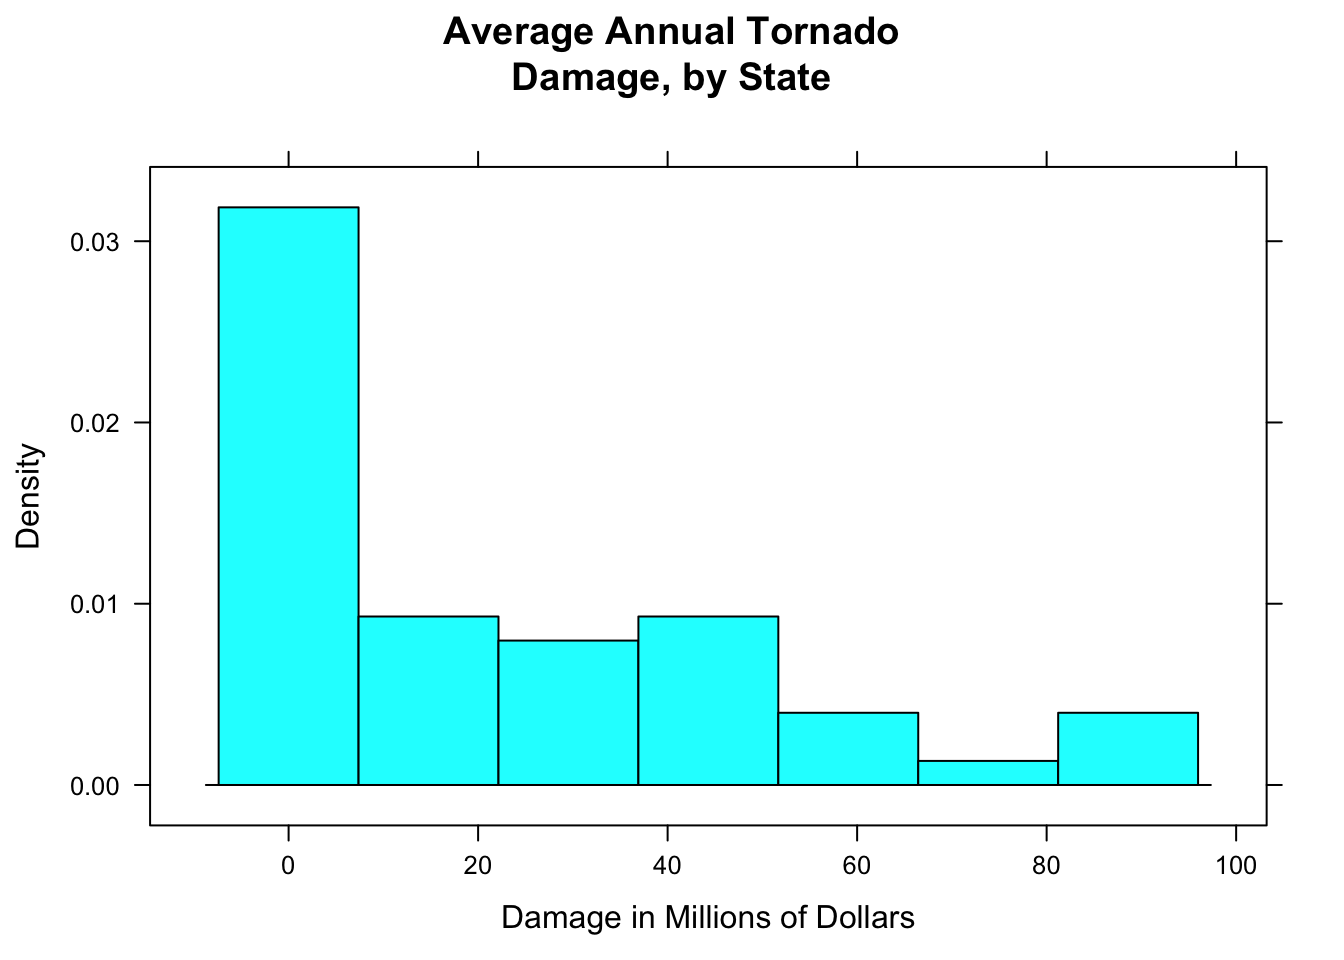 Tornado damge, with default breaks.  All rectangles have the same width.